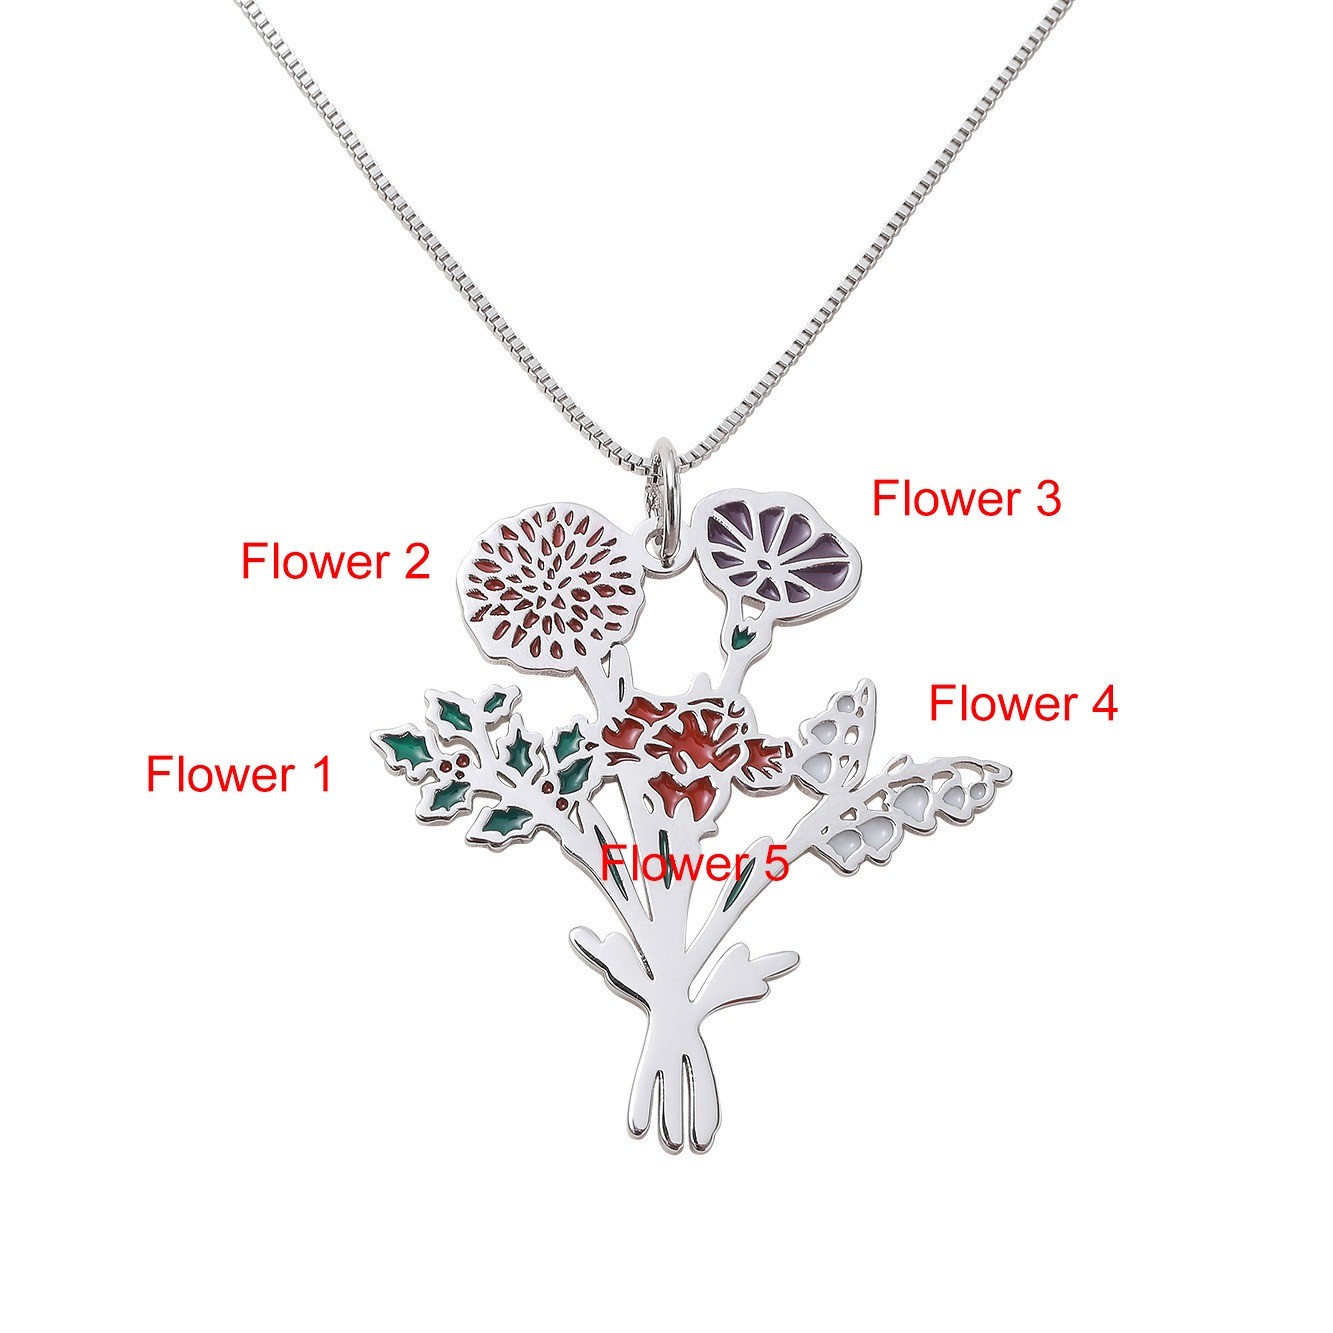 Custom Birth Flowers Bouquet Necklace, Sterling Silver 925 Floral Jewelry, Mother's Day/Birthday Gift for Mom/Grandma from Daughter/Granddaughter